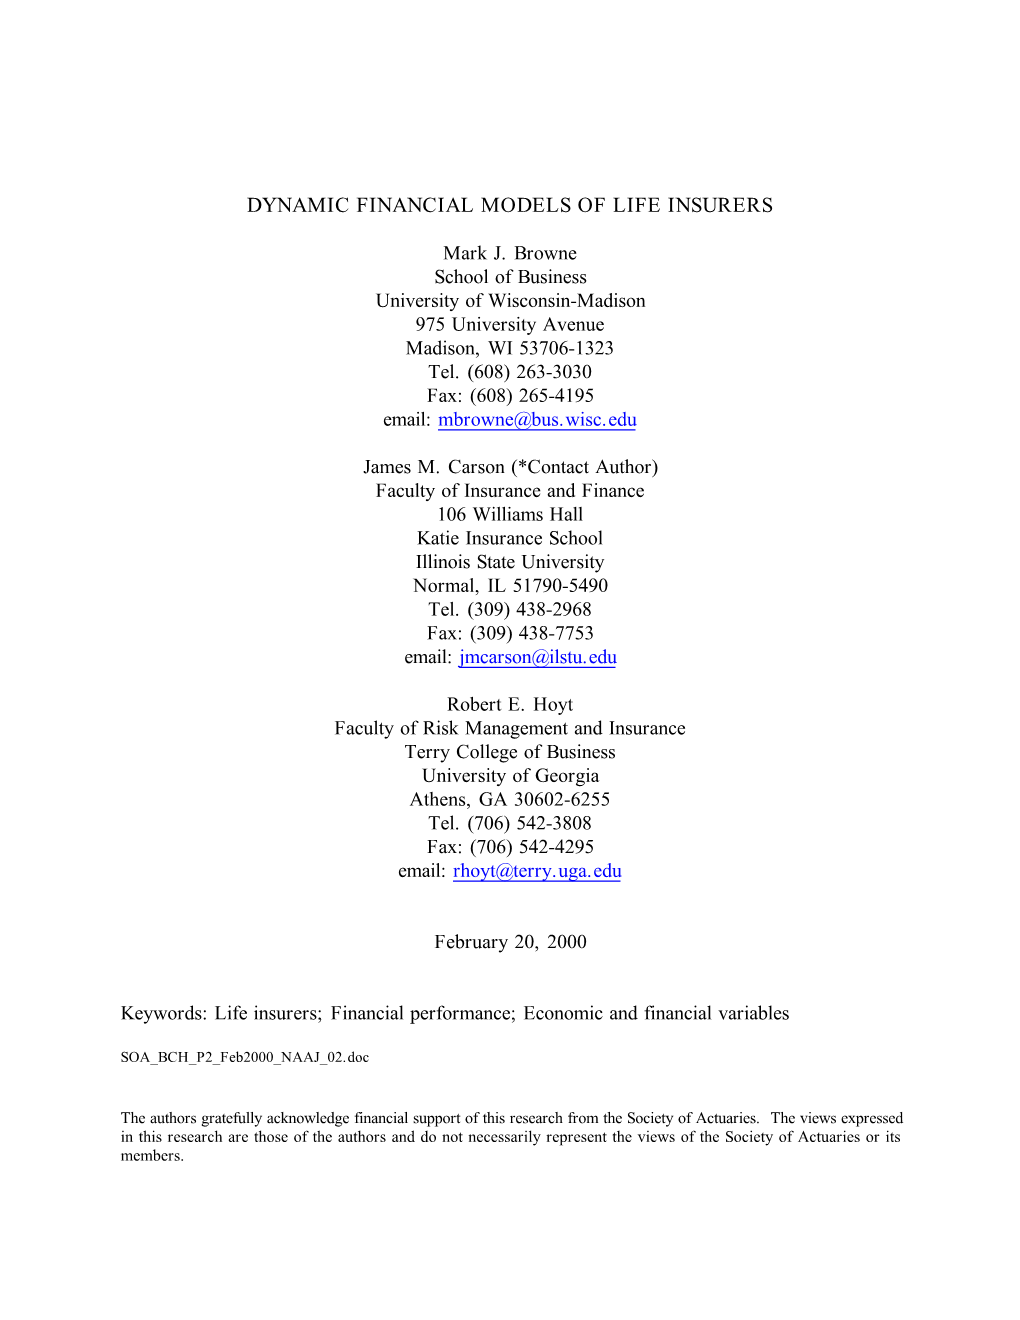 Dynamic Financial Models of Life Insurers